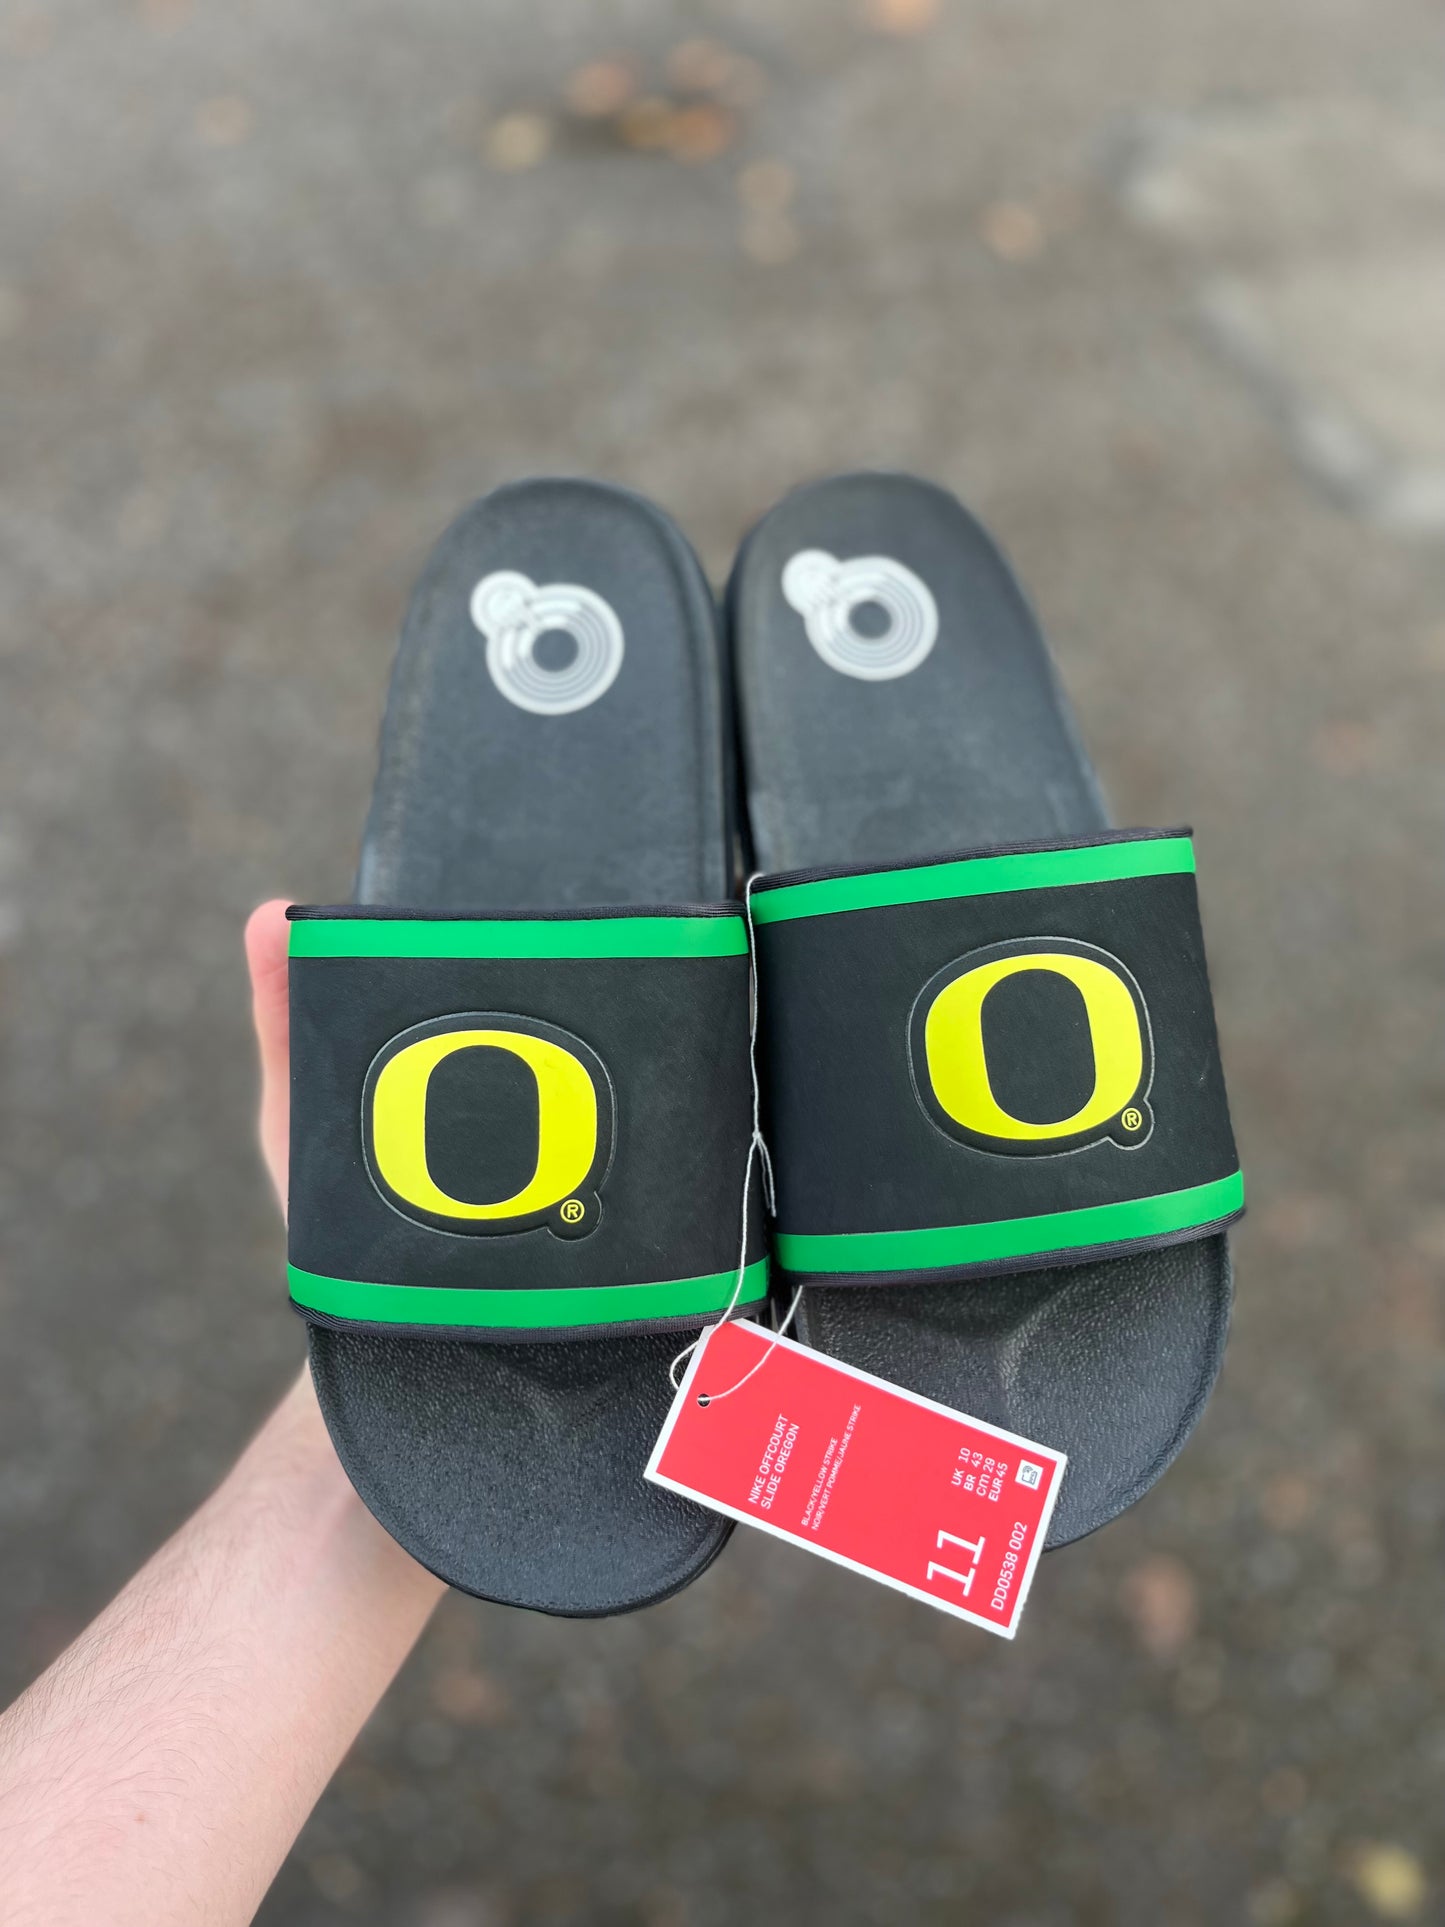 UO player issued slides (size 11)